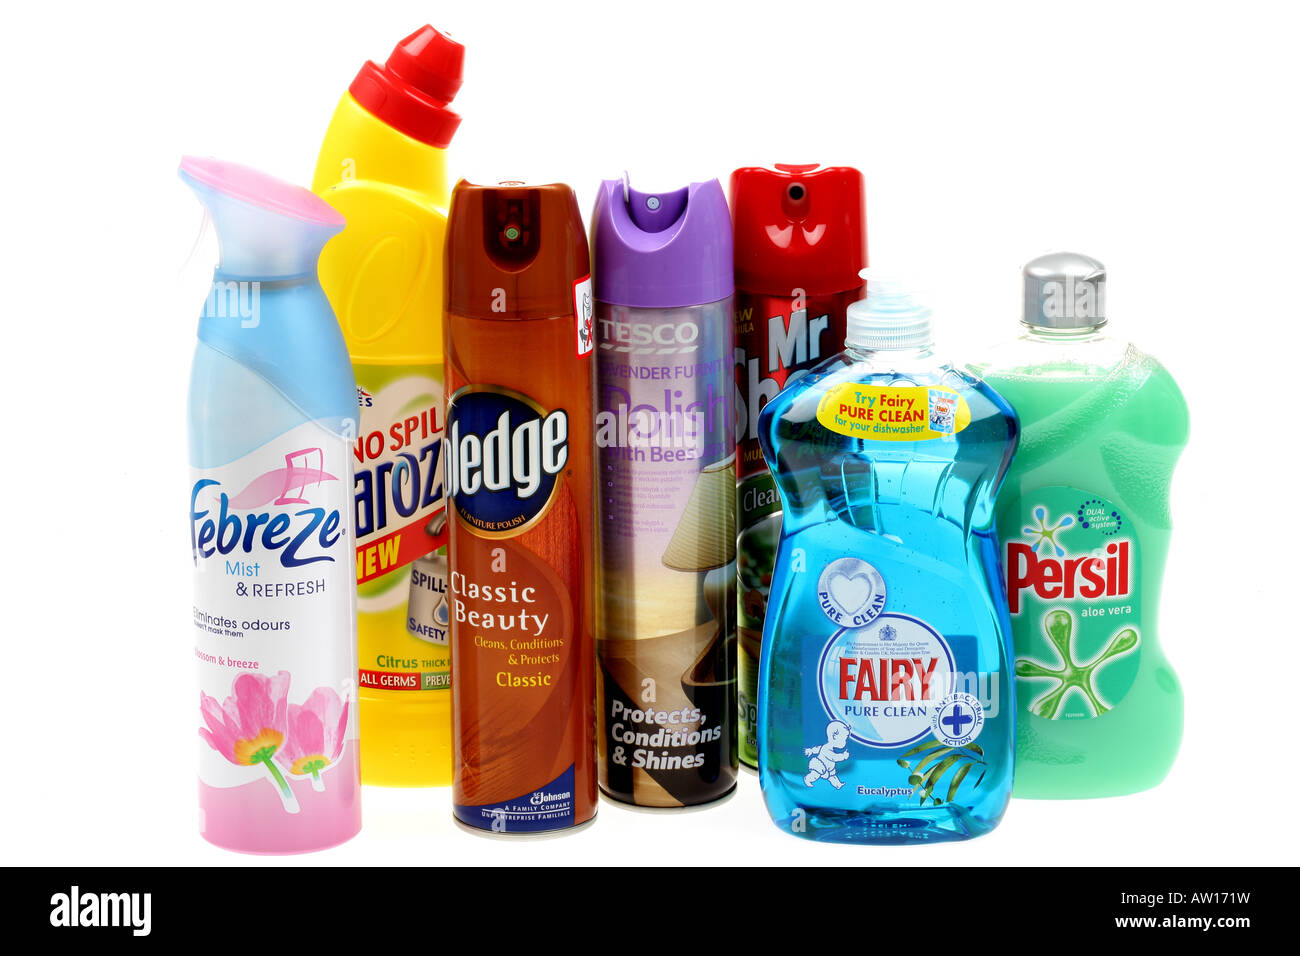 https://c8.alamy.com/comp/AW171W/household-cleaning-products-AW171W.jpg